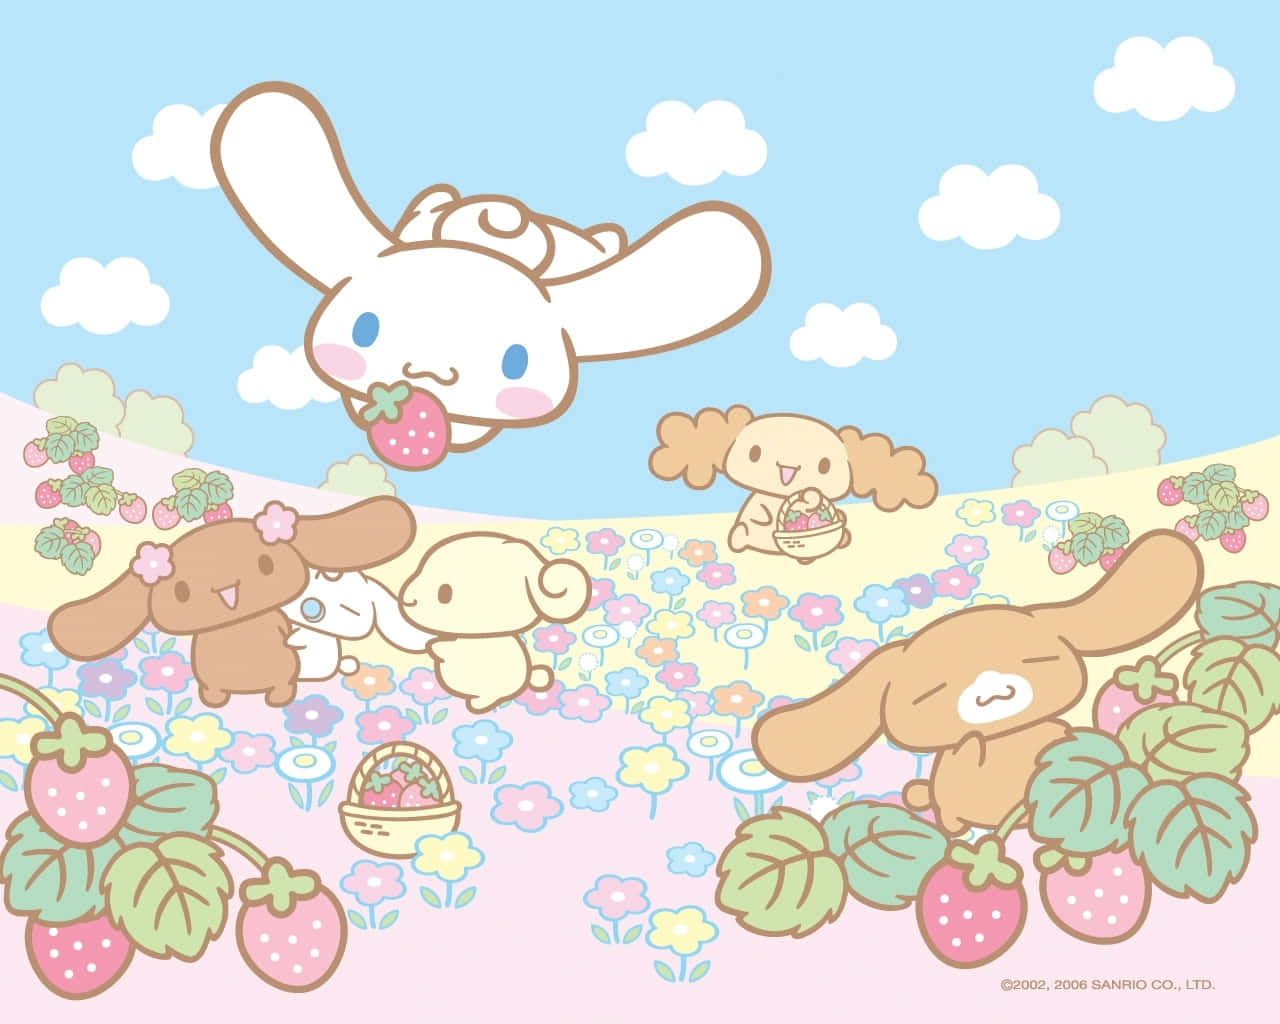 Get your daily dose of cuteness with the Cinnamoroll Desktop Wallpaper Wallpaper